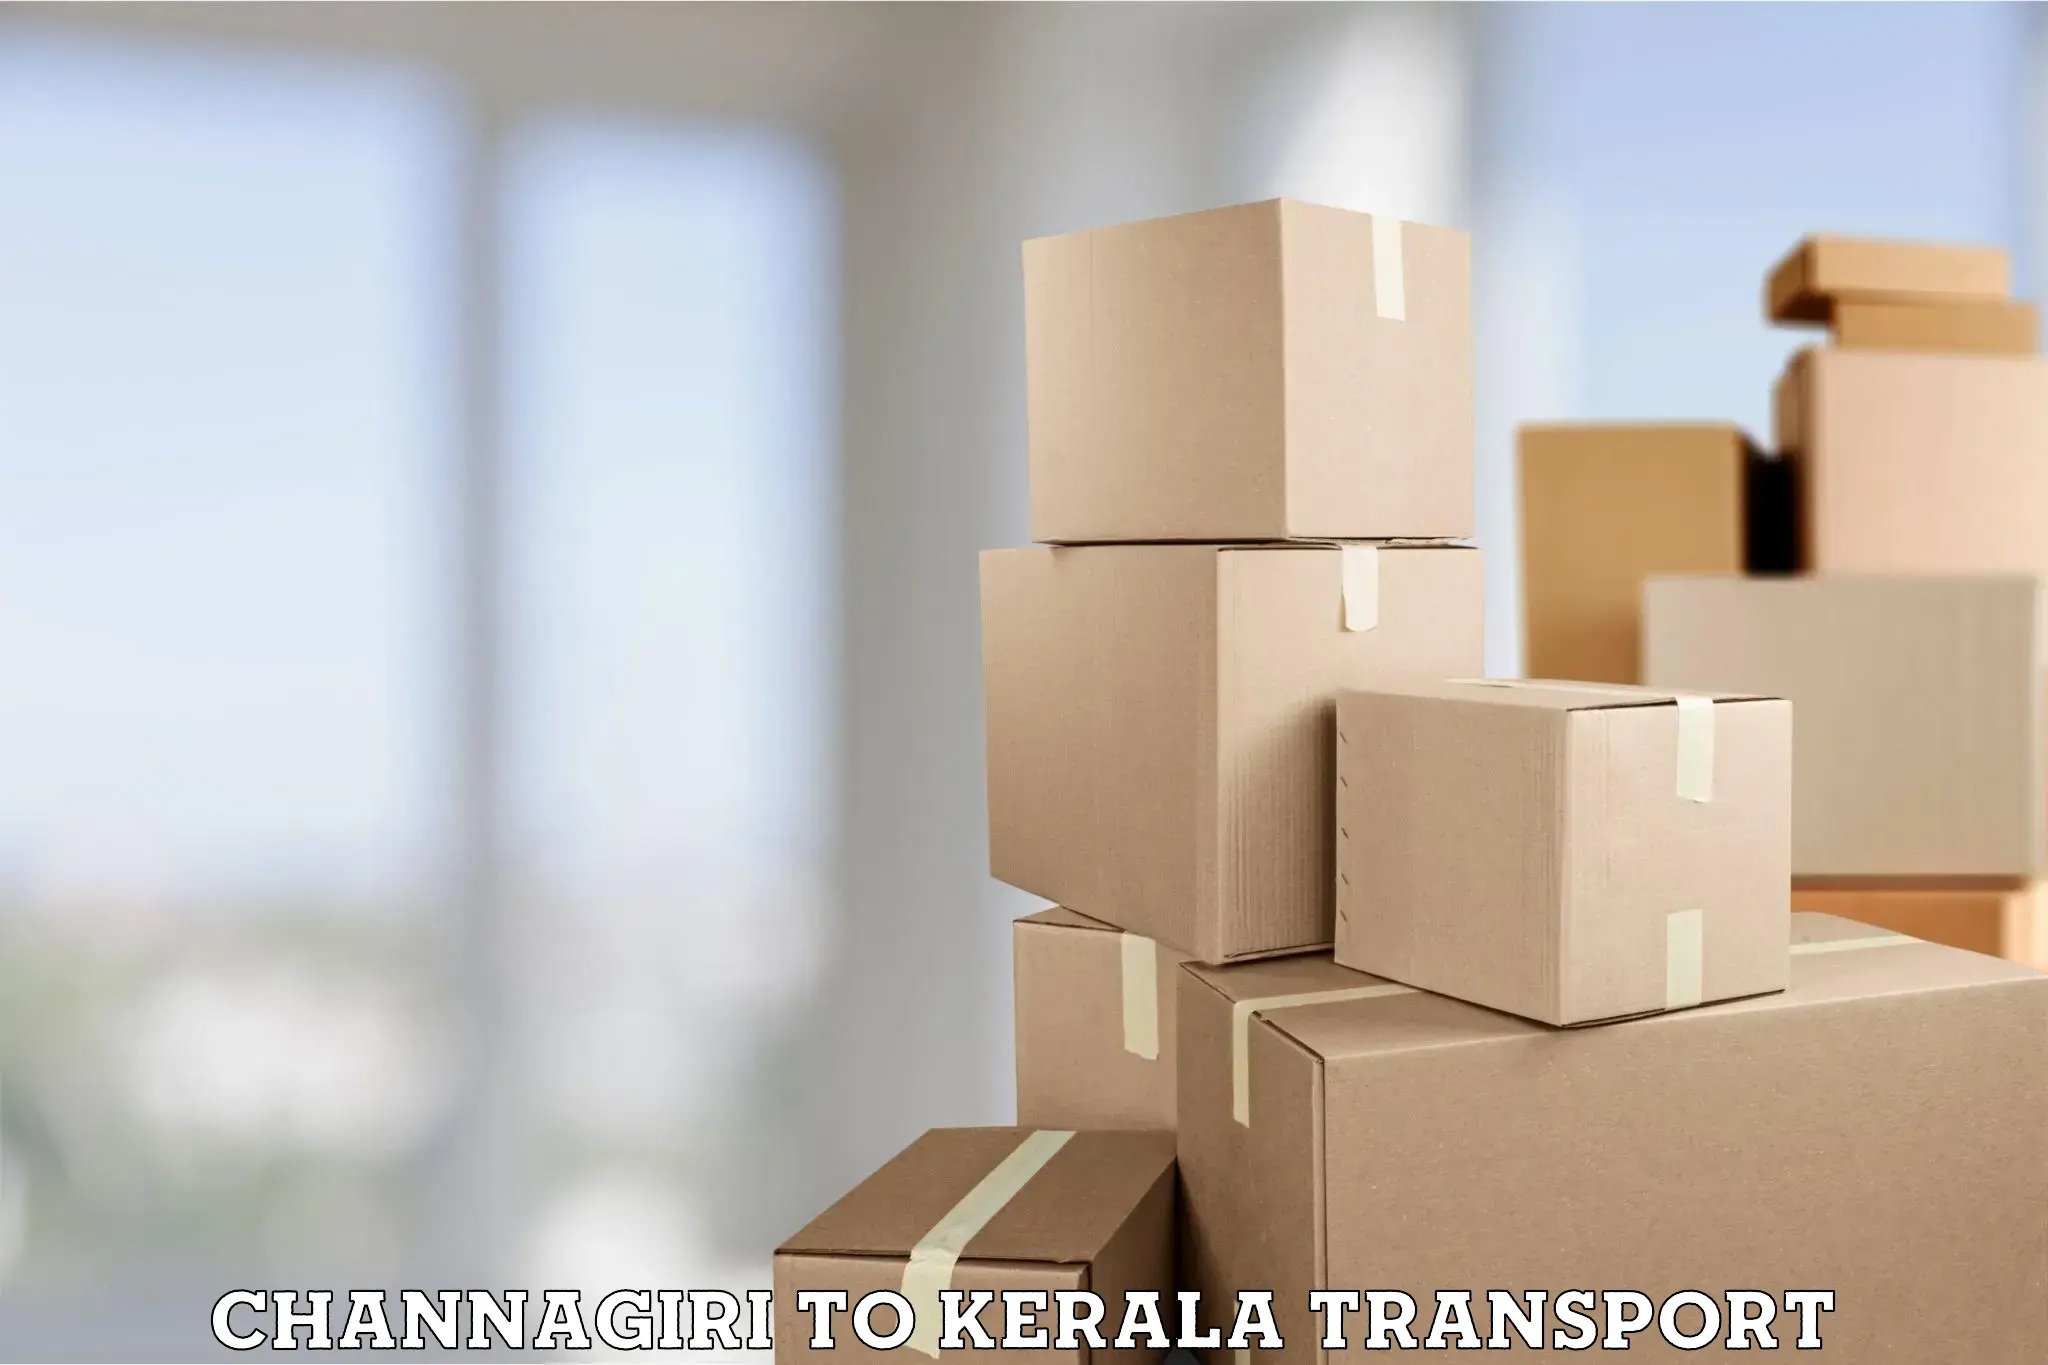 Goods delivery service Channagiri to Kerala